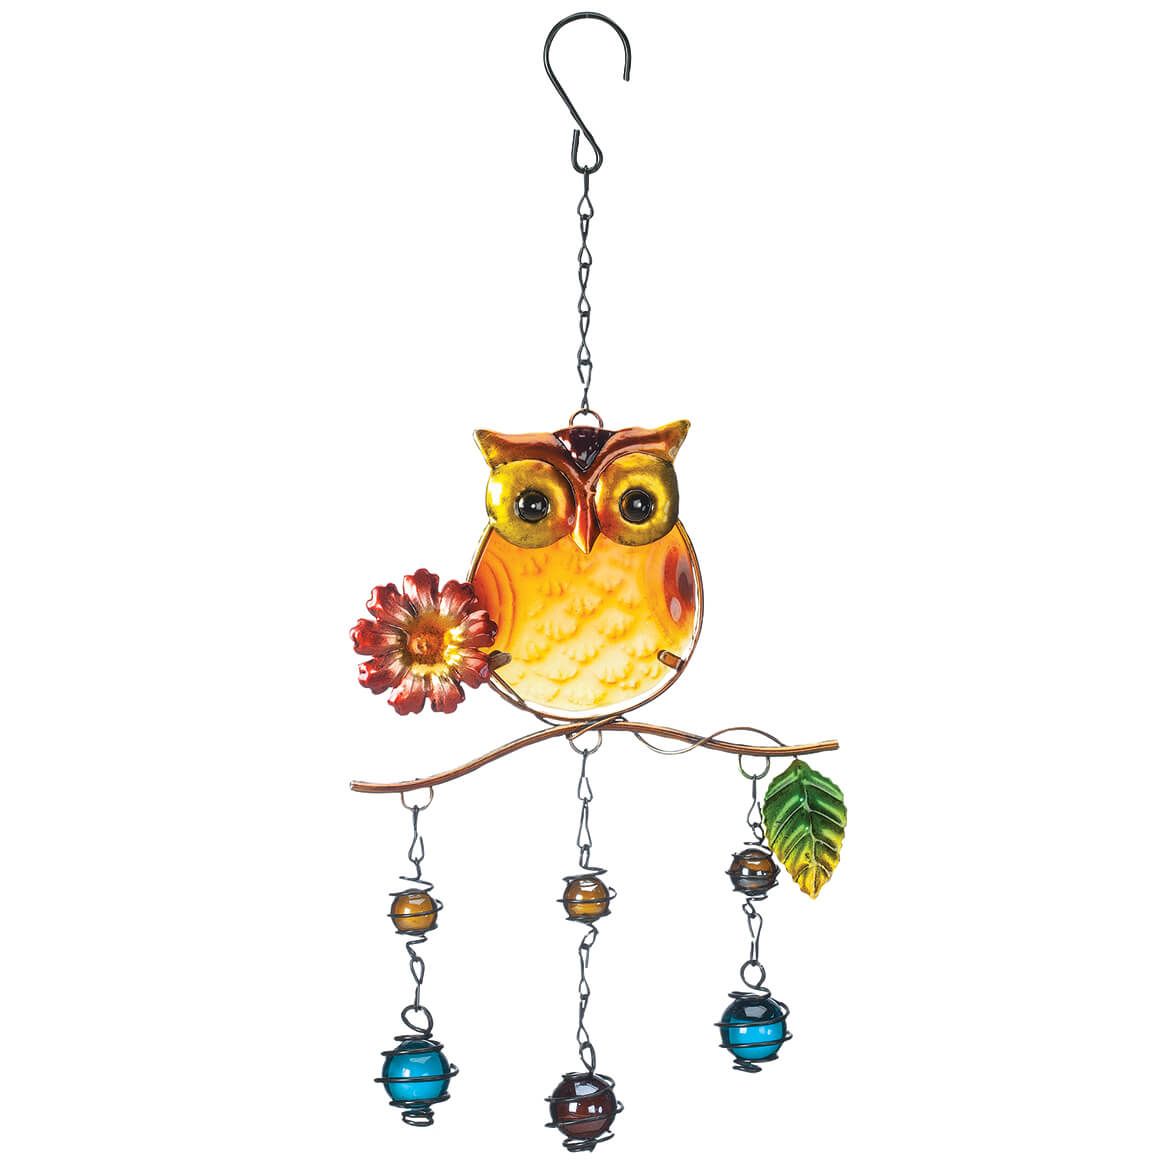 Glass and Metal Owl Garden Art by Fox River™ Creations + '-' + 373890